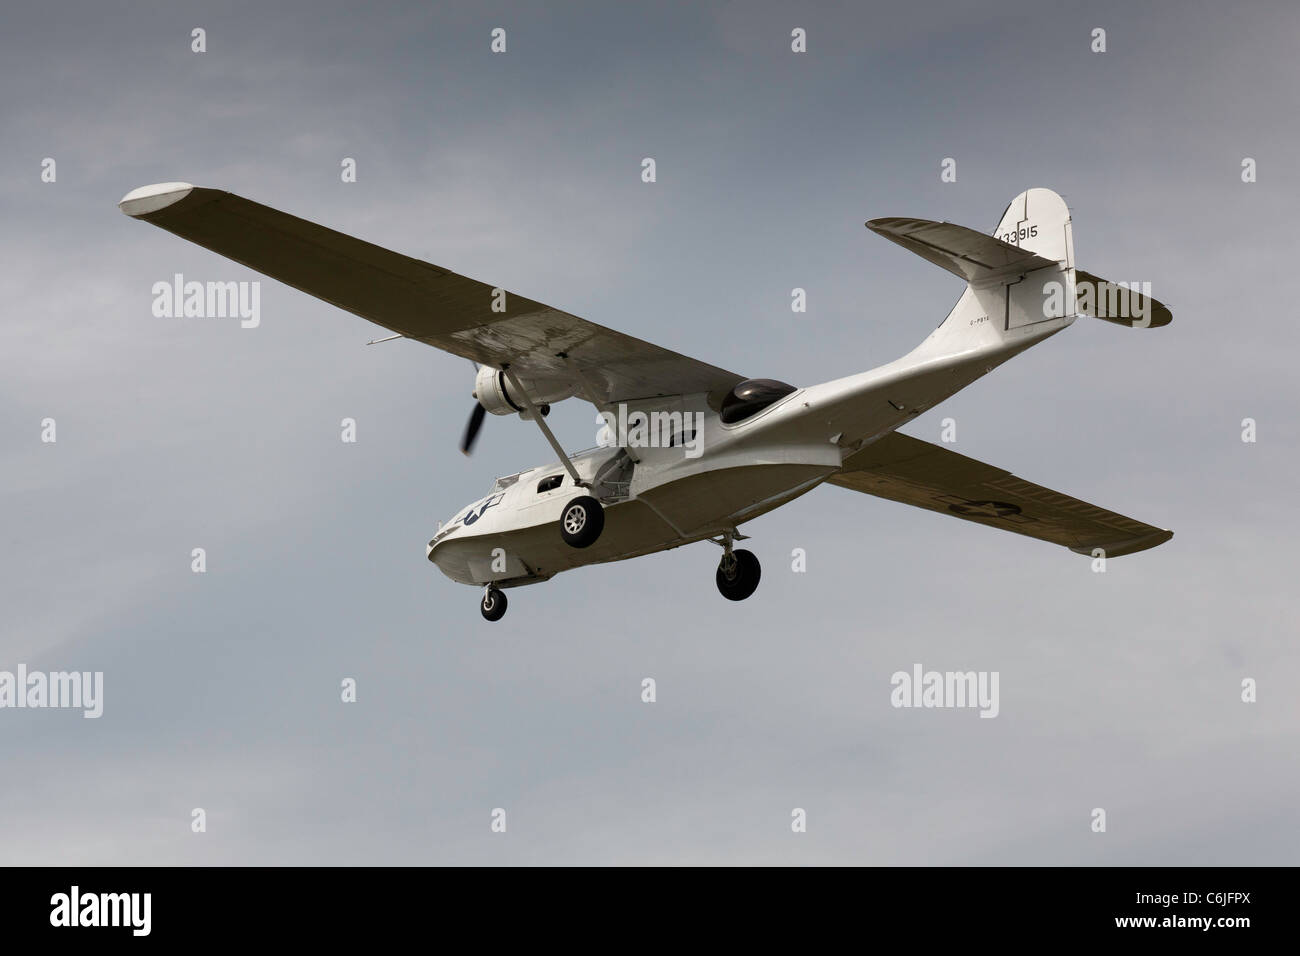 A Catalina flying boat at Shoreham airfield in 2011 Stock Photo